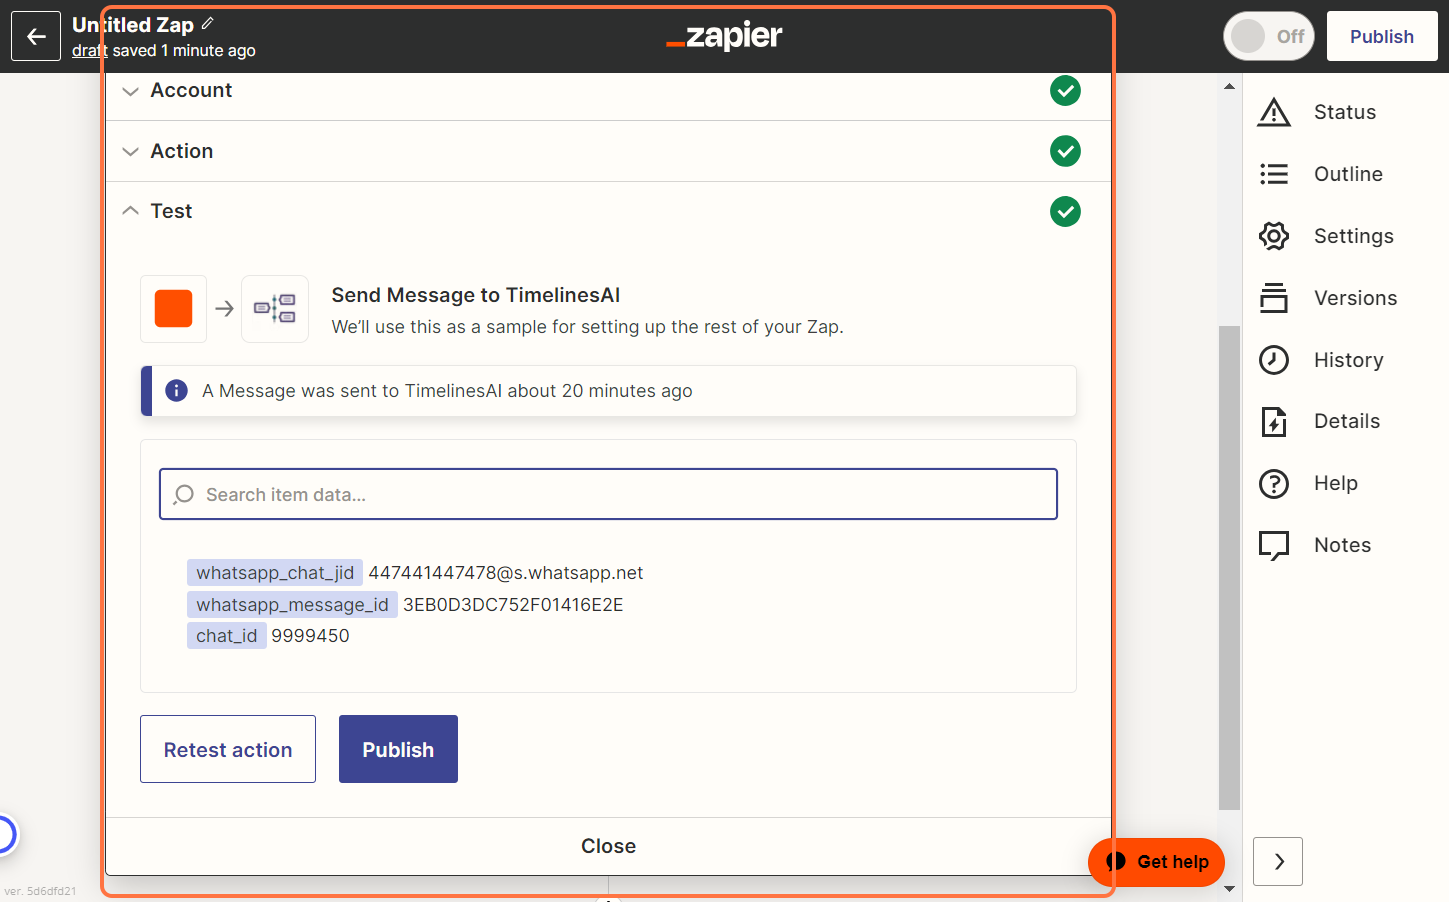 Test and Publish your Zap